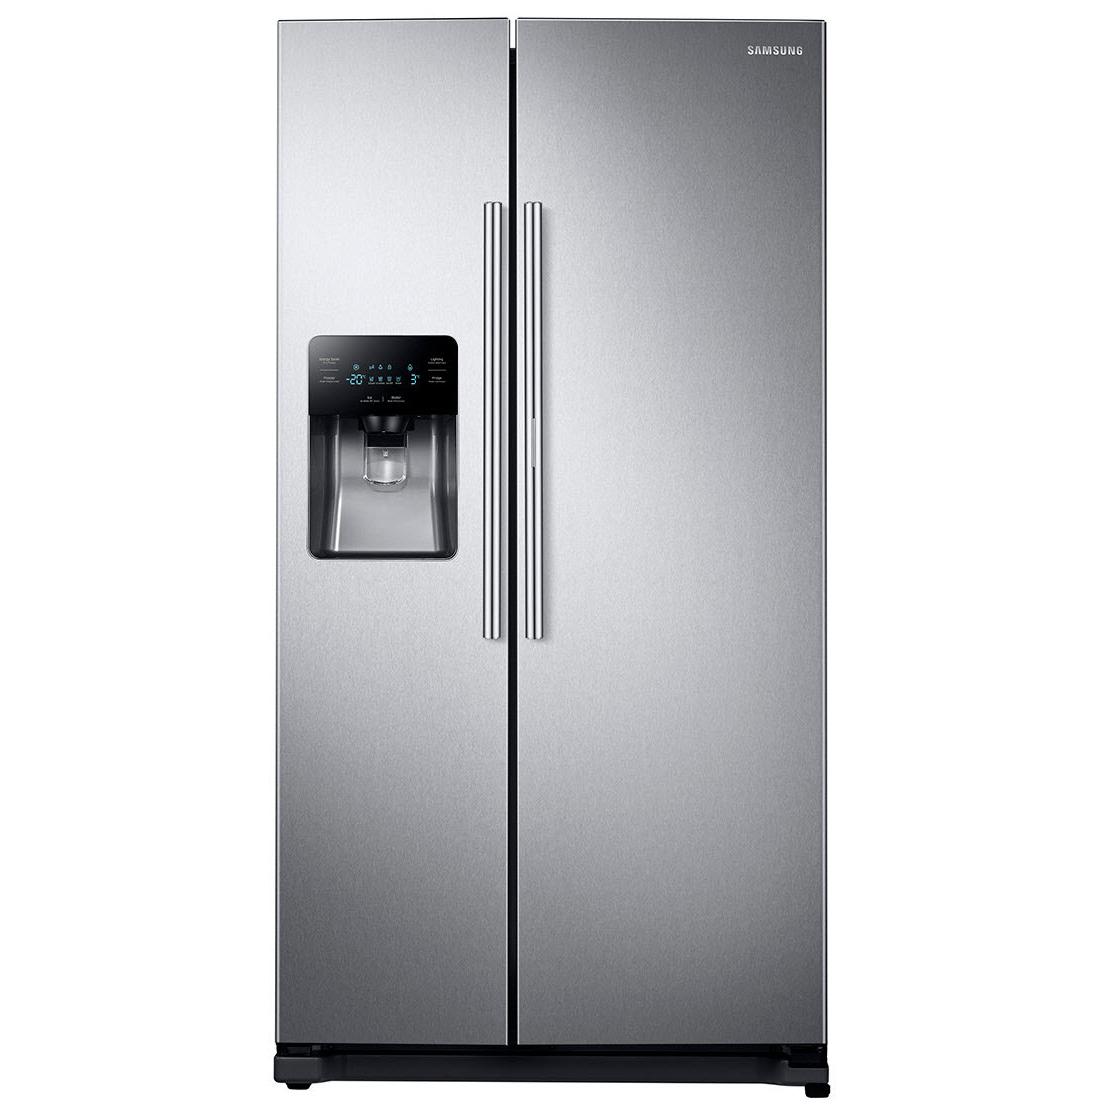 Samsung 36-inch, 24.7 cu. ft. Side-by-Side Refrigerator with Ice and Water Dispensing System RH25H5611SR/AA